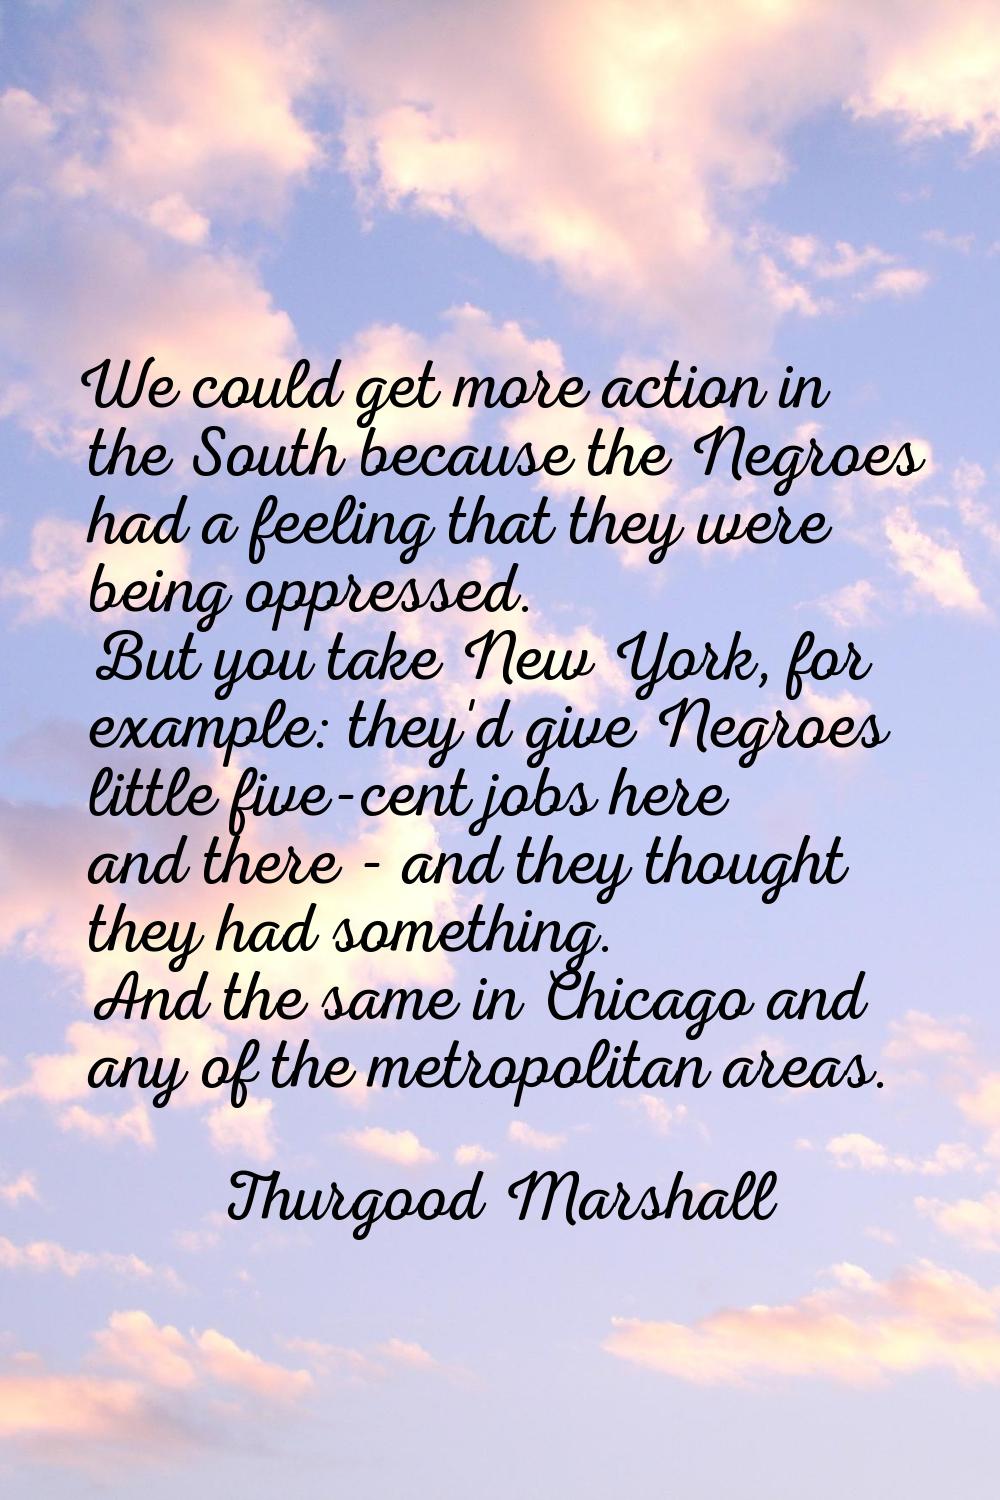 We could get more action in the South because the Negroes had a feeling that they were being oppres